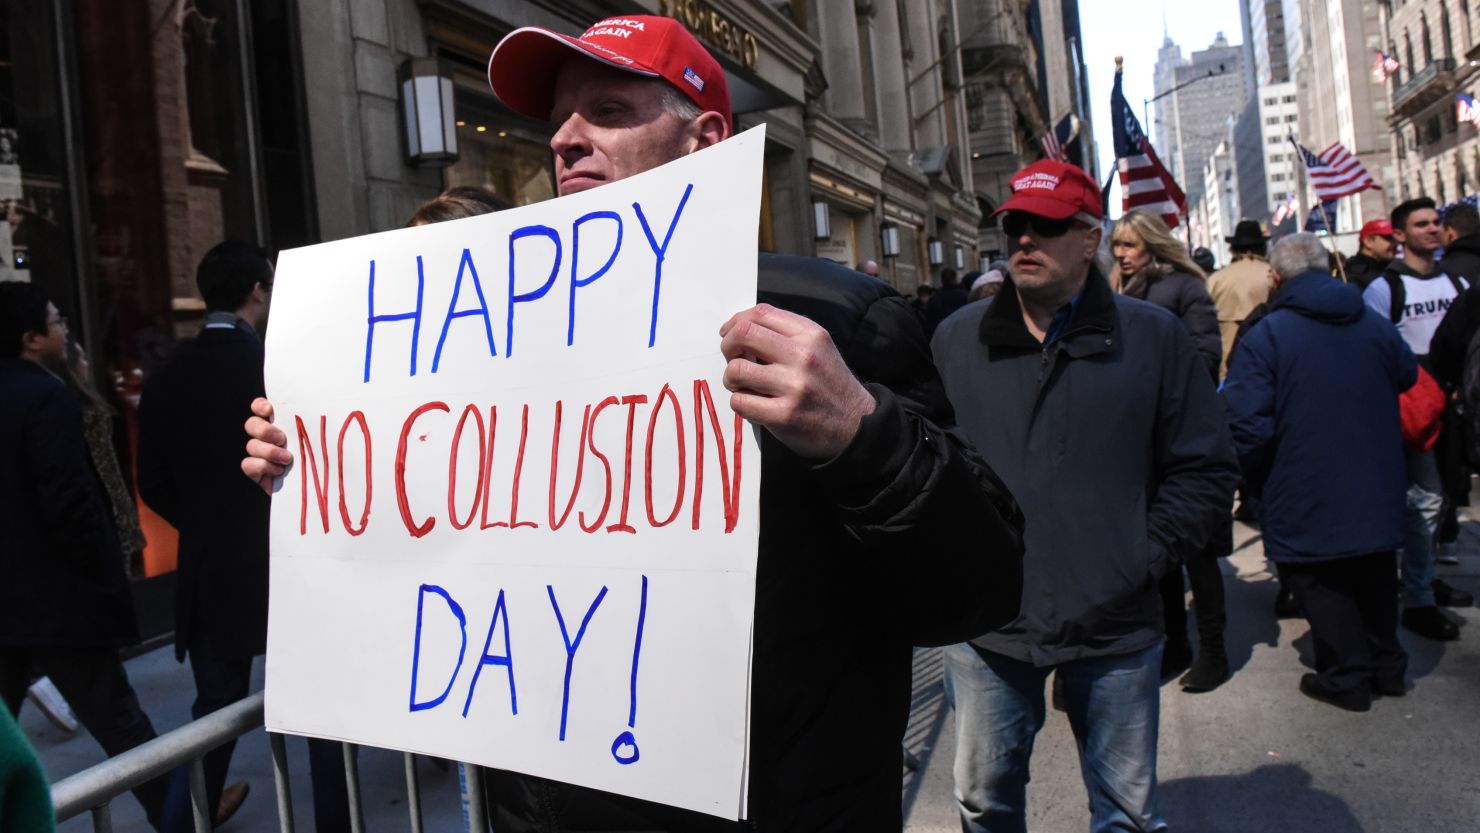 A man holds a sign that reads "Happy No Collusion Day" while people attend a rally in support of President Donald Trump near Trump Tower on March 23, 2019 in New York City. 